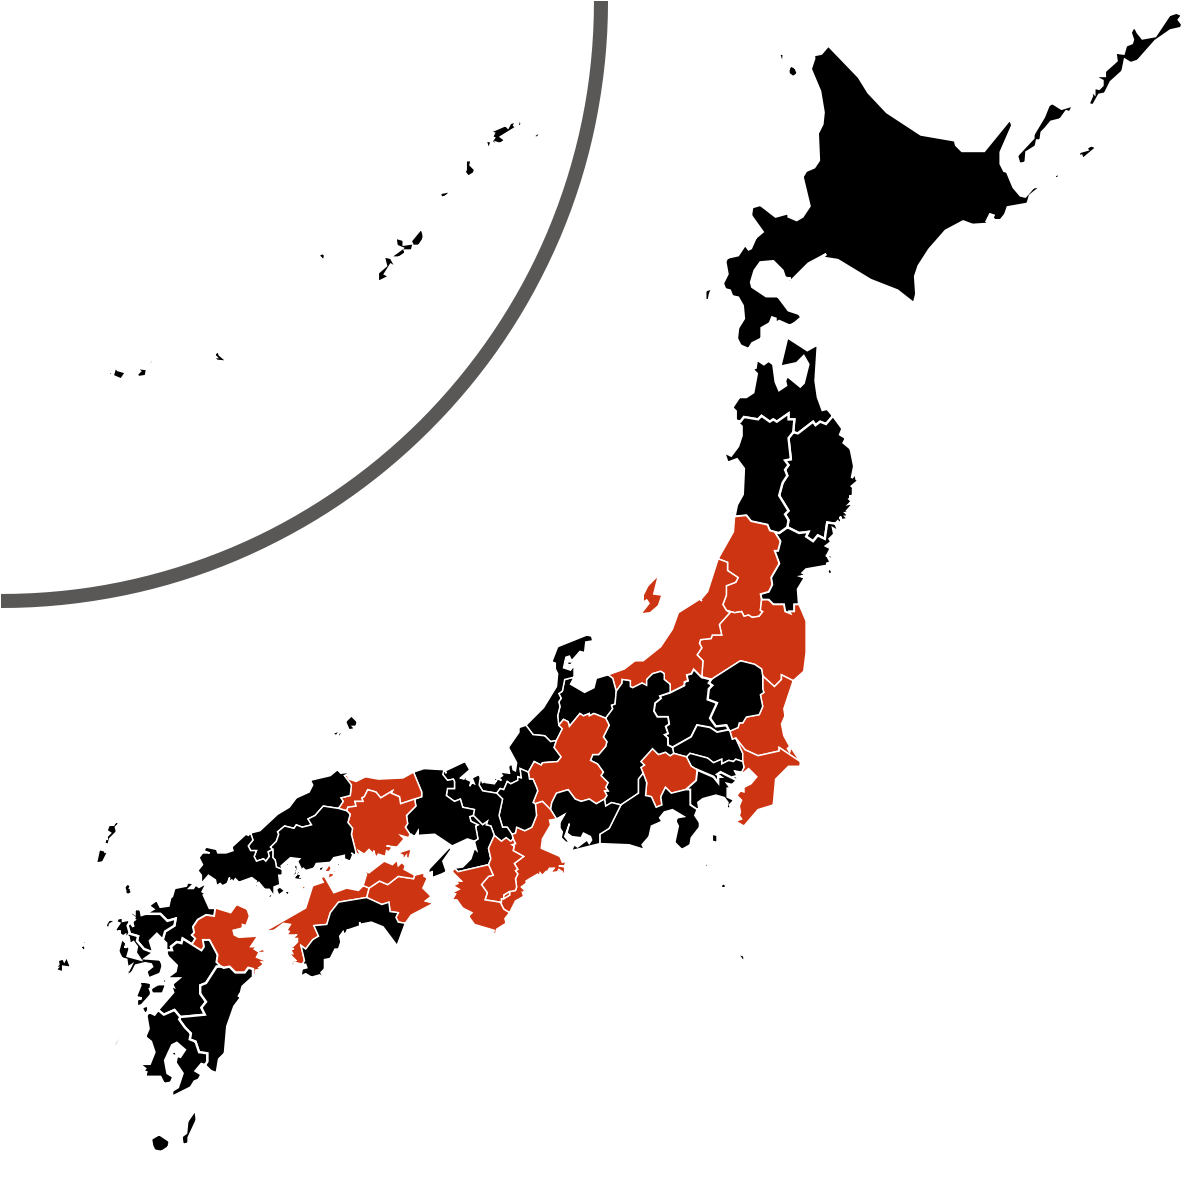 A Map Of Japan With Orange And White Outline